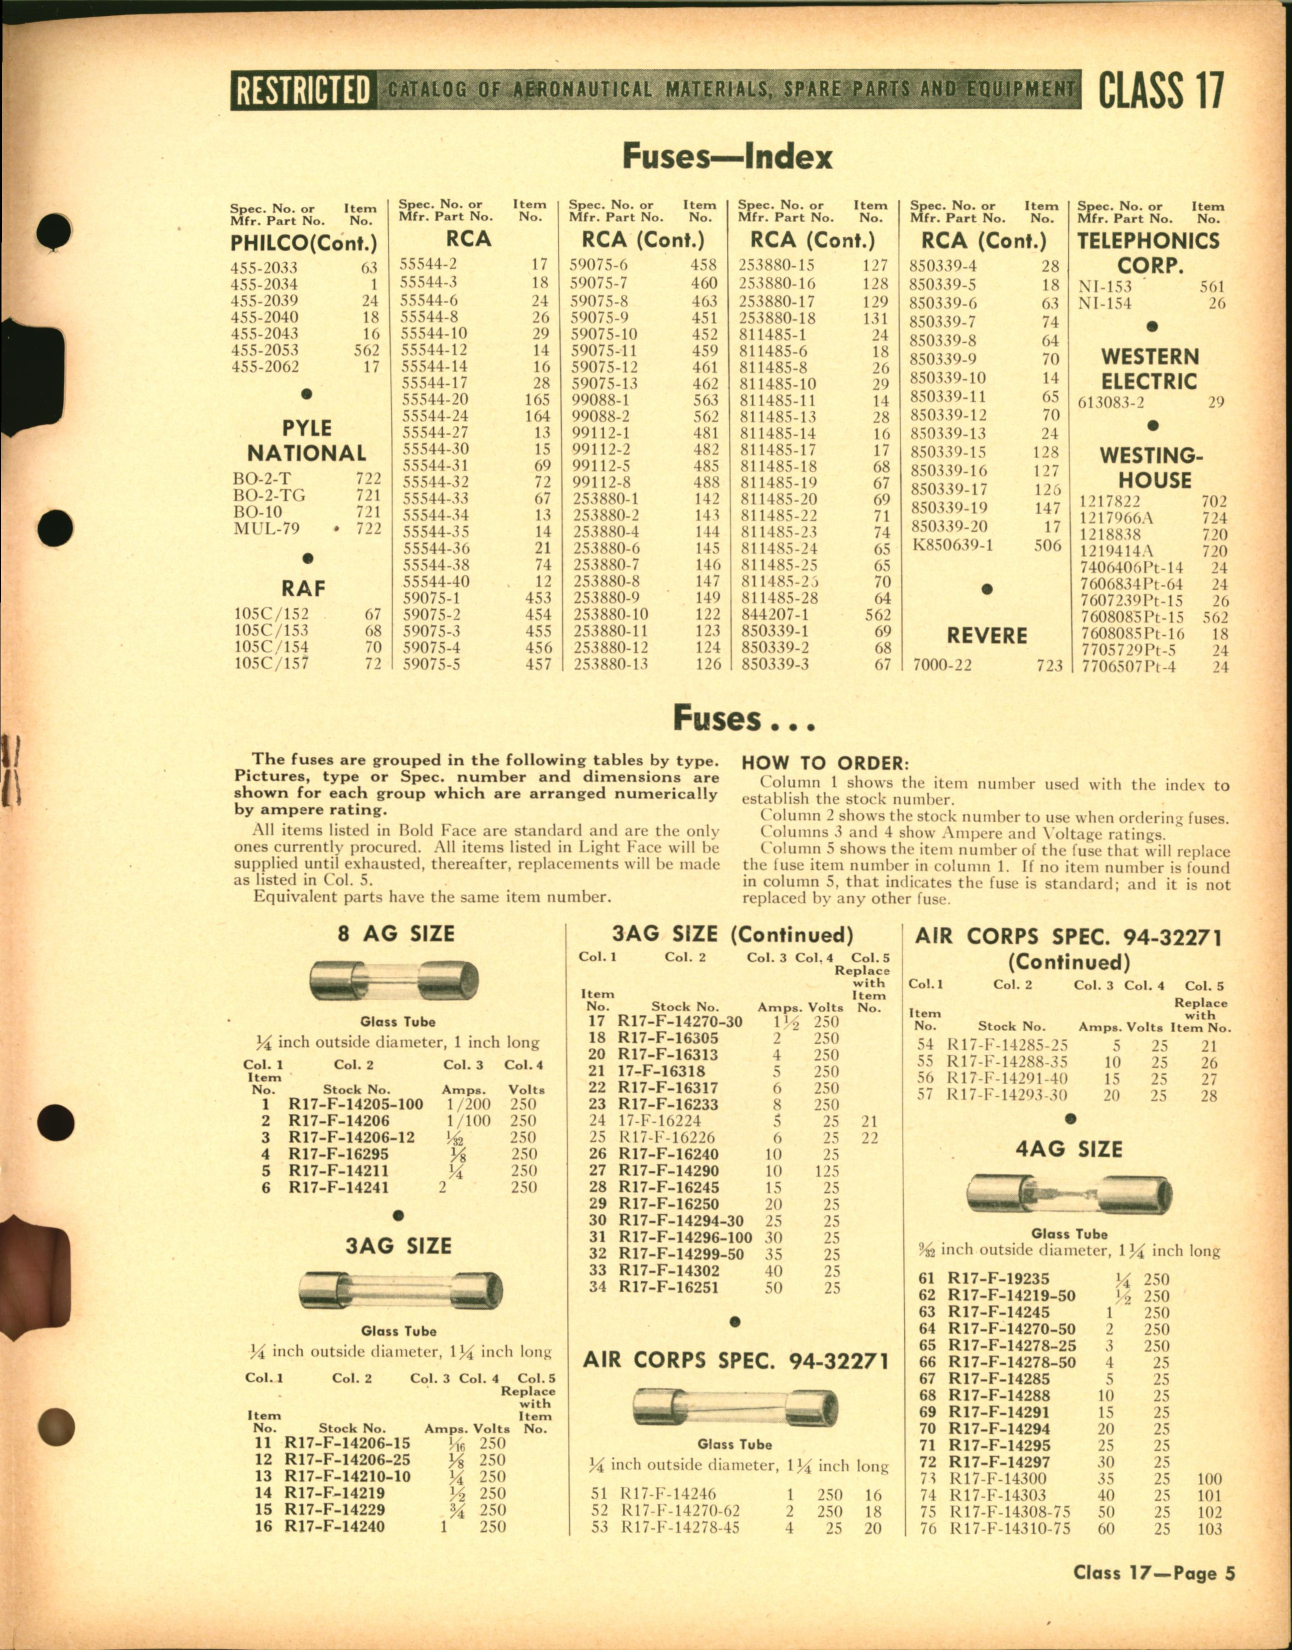 Sample page 5 from AirCorps Library document: Fuses